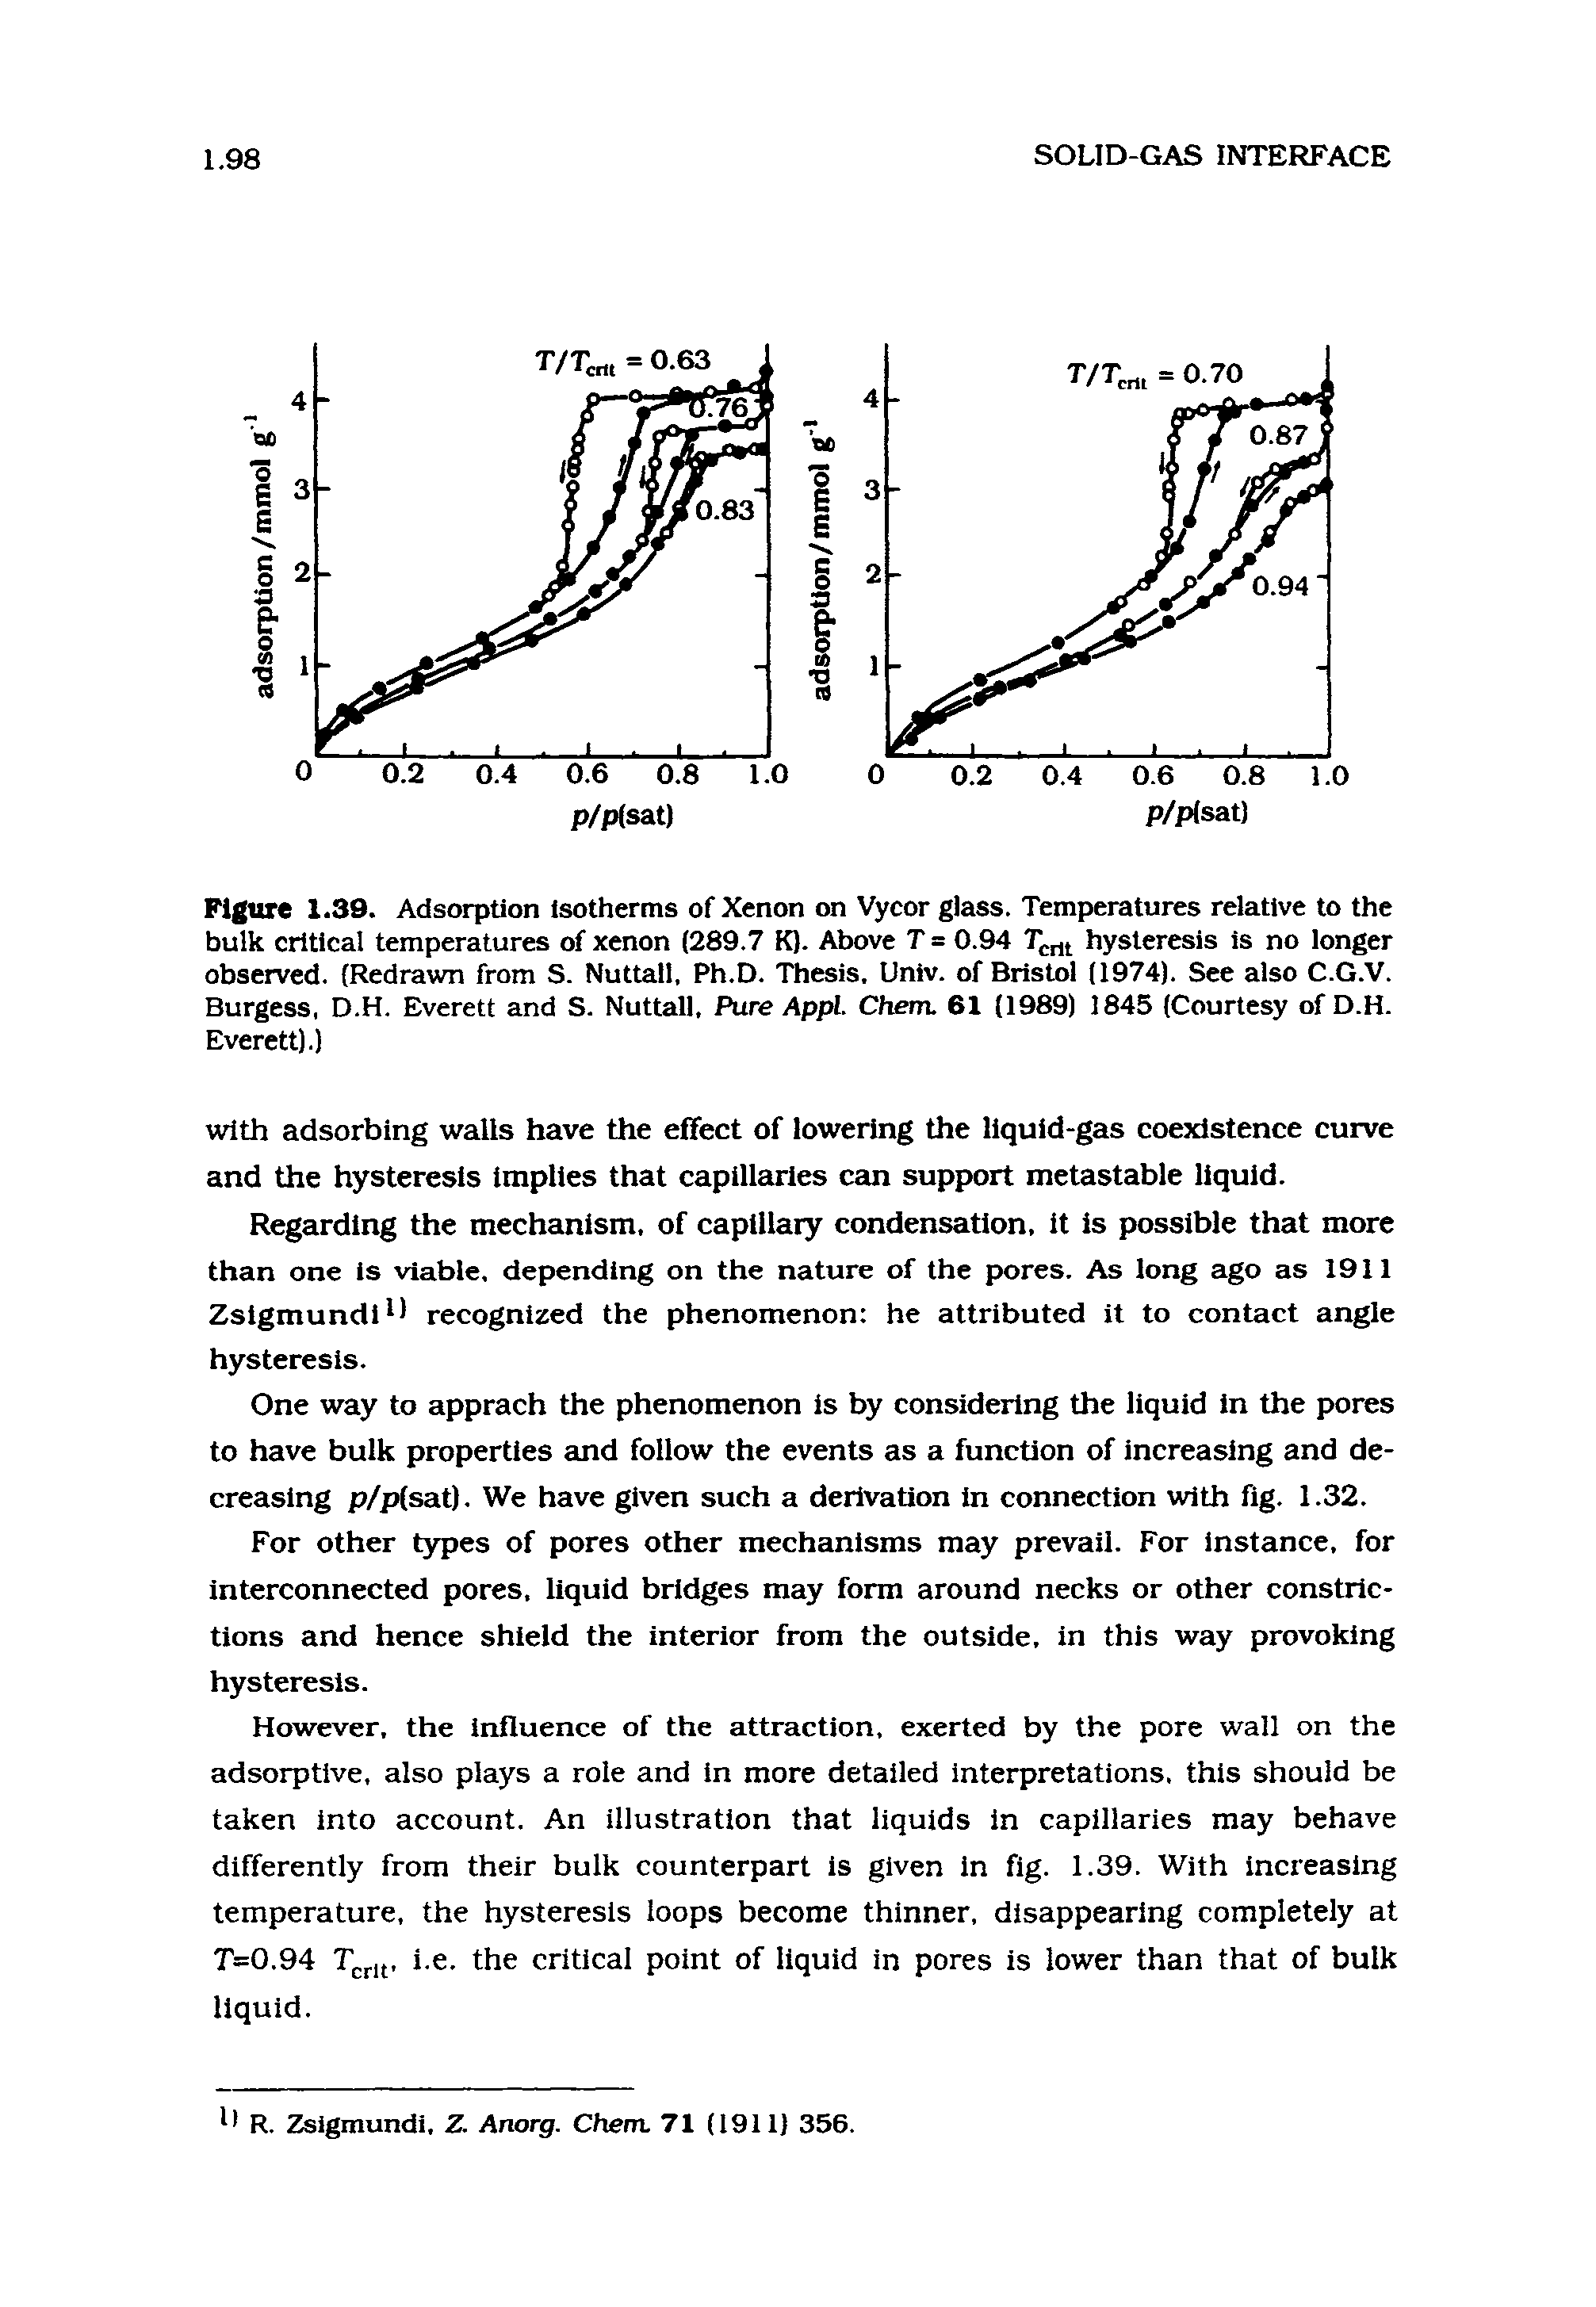 Figure 1.39. Adsorption isotherms of Xenon on Vycor glass. Temperatures relative to the bulk critical temperatures of xenon (289.7 K). Above T = 0.94 hysteresis is no longer observed. (Redrawn from S. Nuttall, Ph.D. Thesis. Univ. of Bristol (1974). See also C.G.V. Burgess, D.H. Everett and S. Nuttall, Pure AppL Chem. 61 (1989) 1845 (Courtesy of D.H. Everett).)...